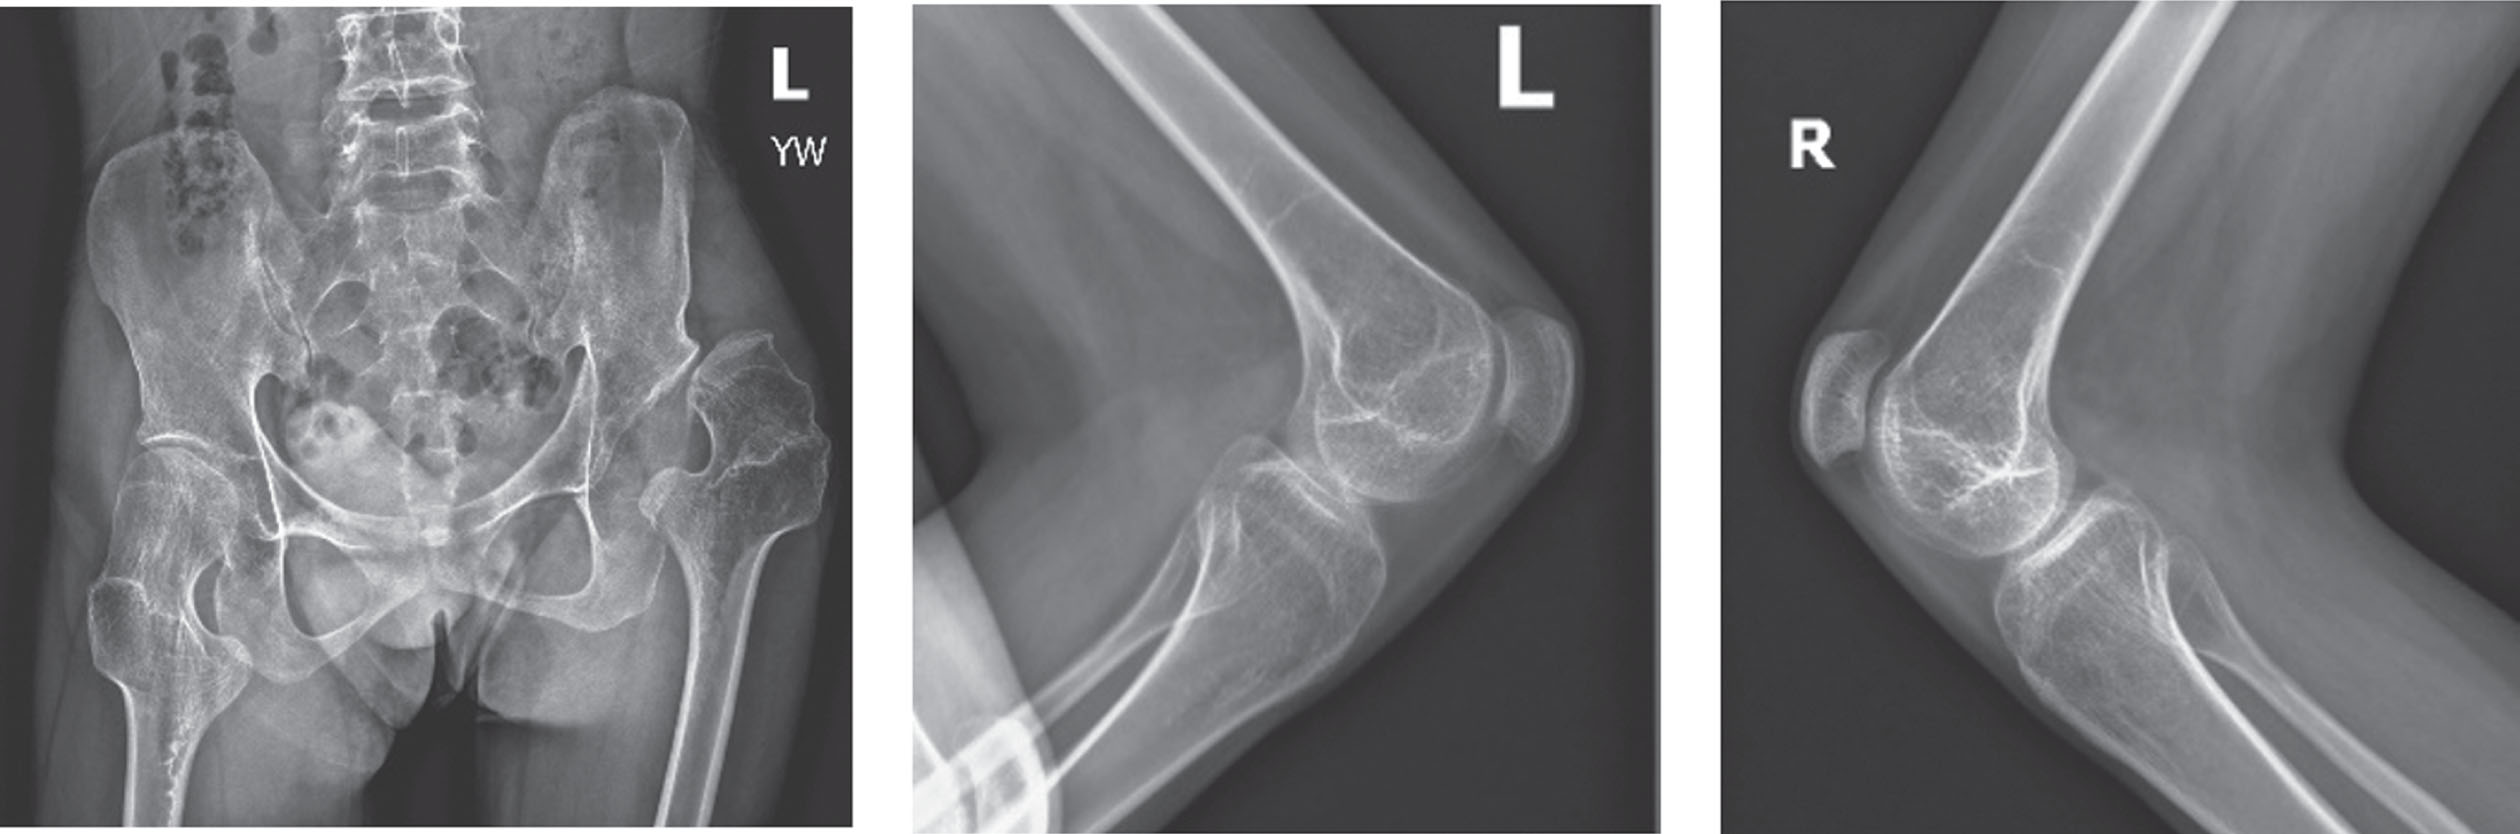 Preoperative x-rays reveal dislocation of the left hip, bilateral knee flexion contractures, and patella alta.